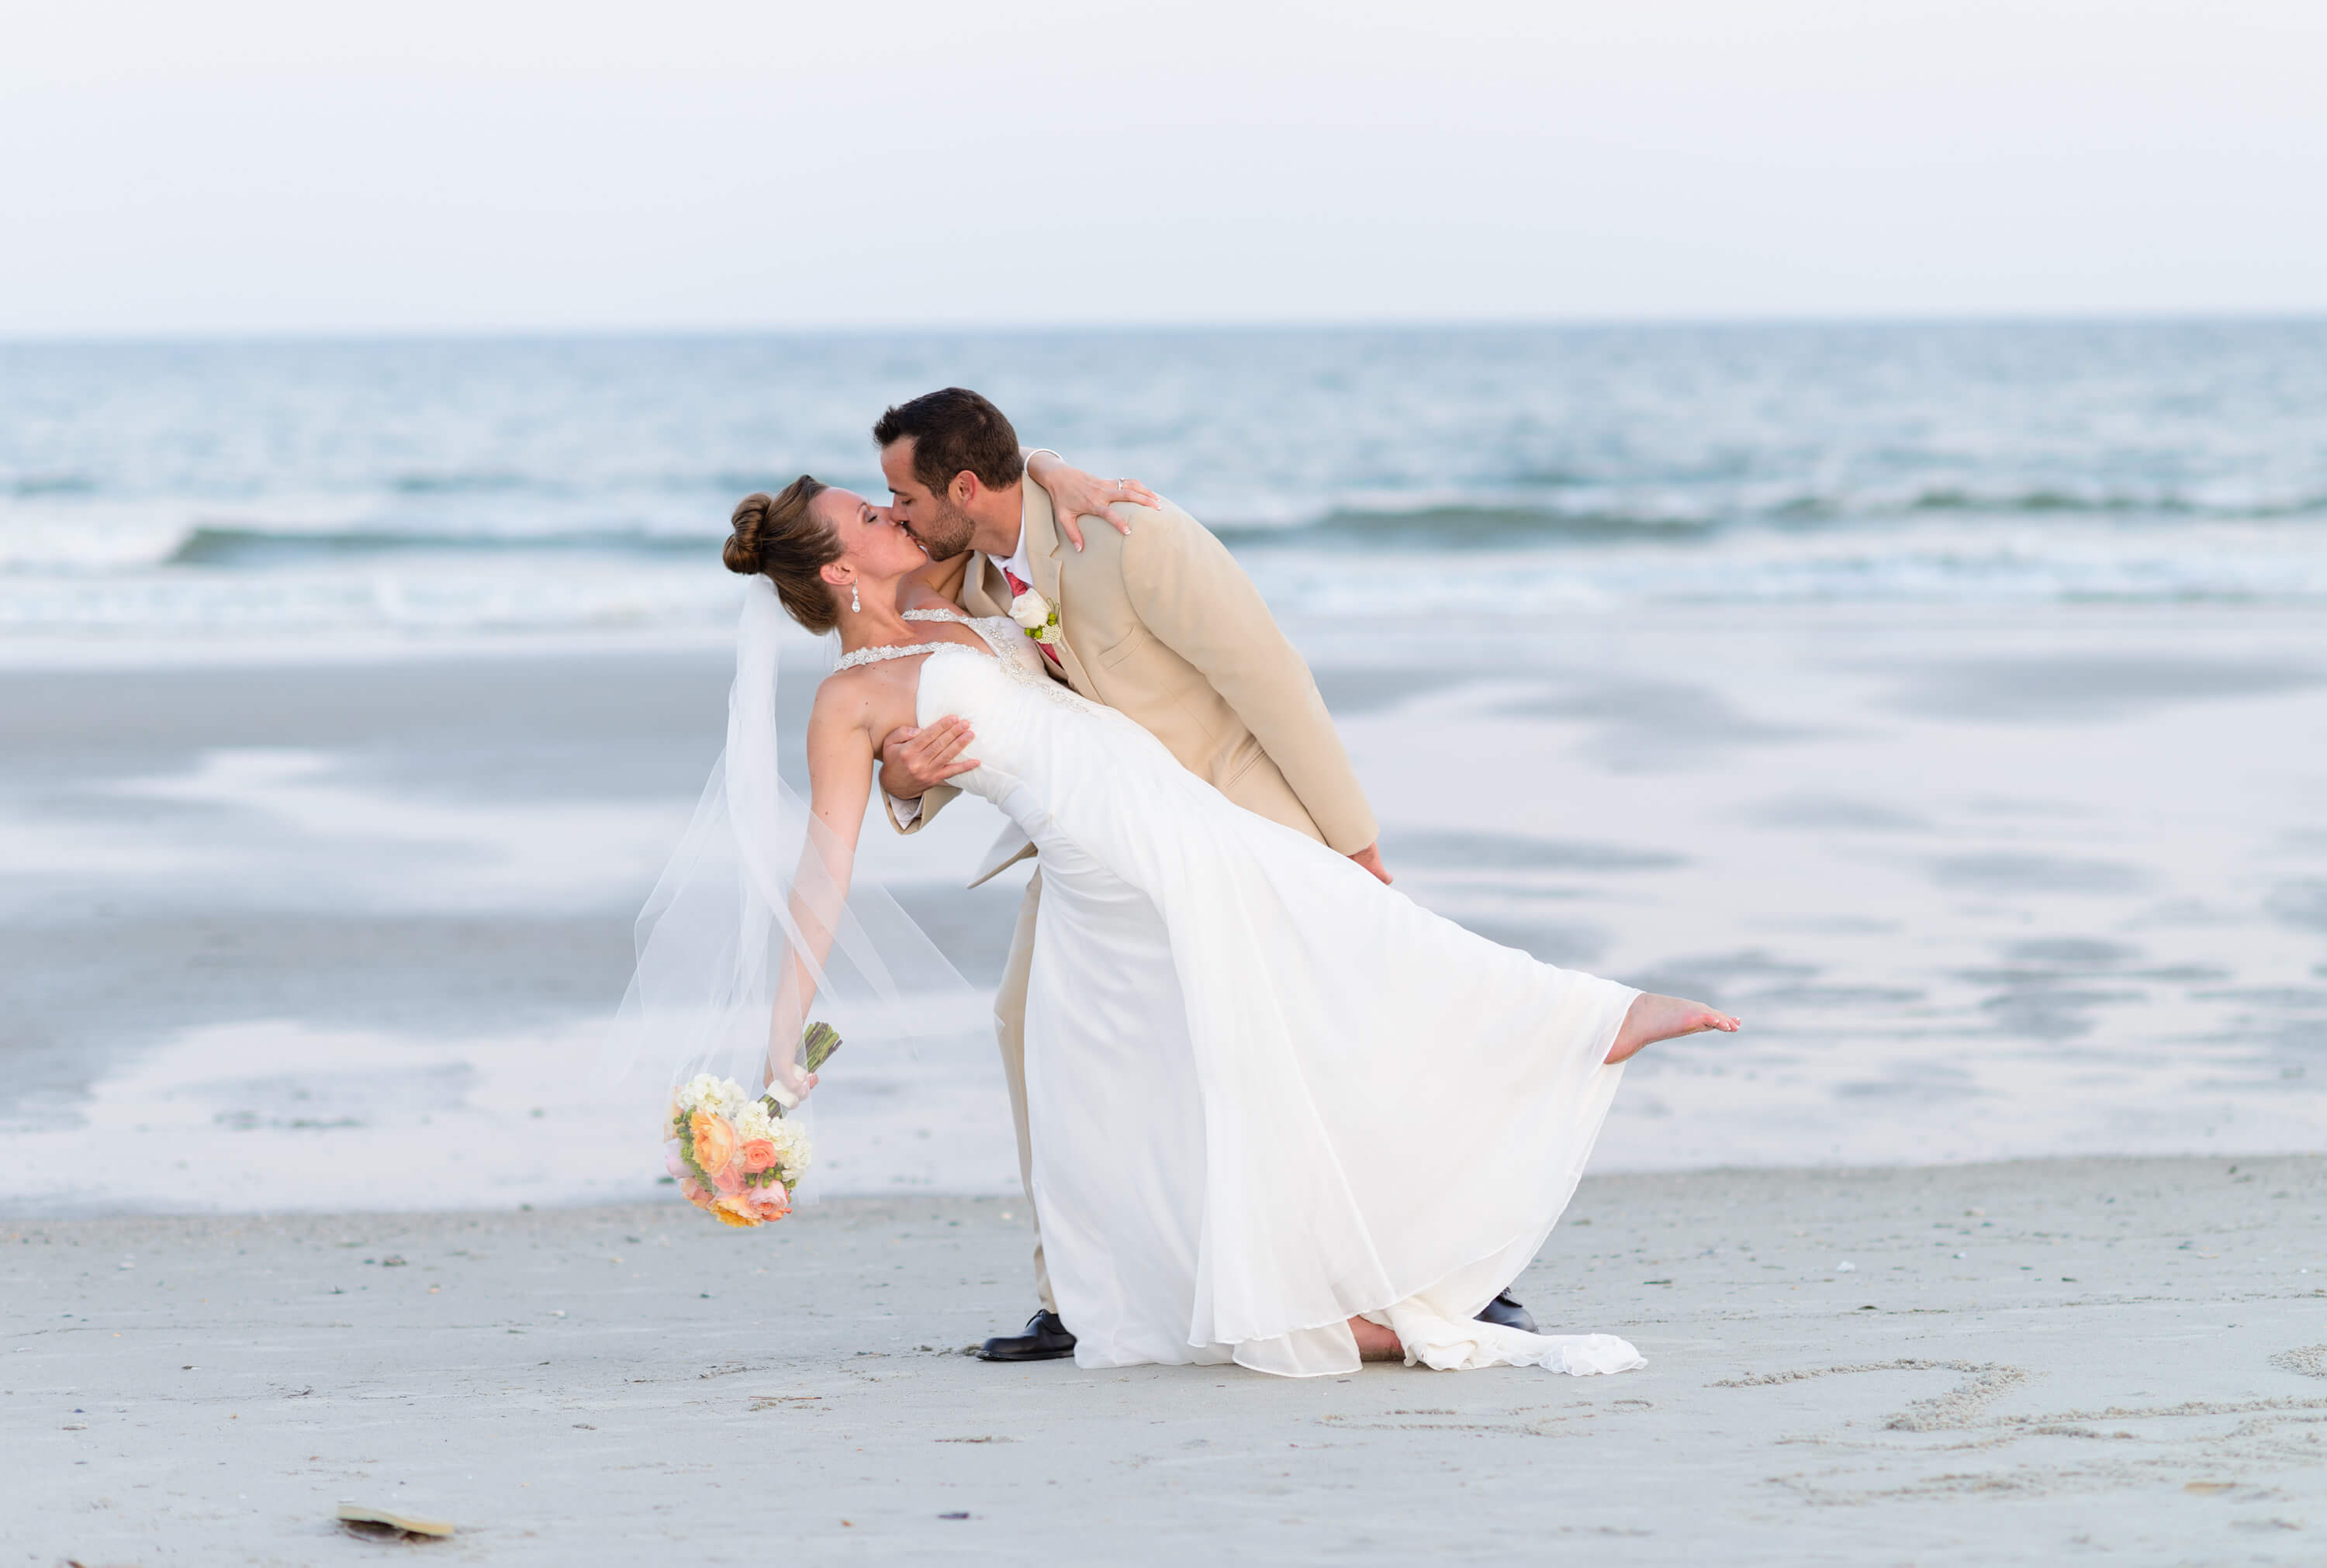 Dipping bride back for a kiss in front of the ocean